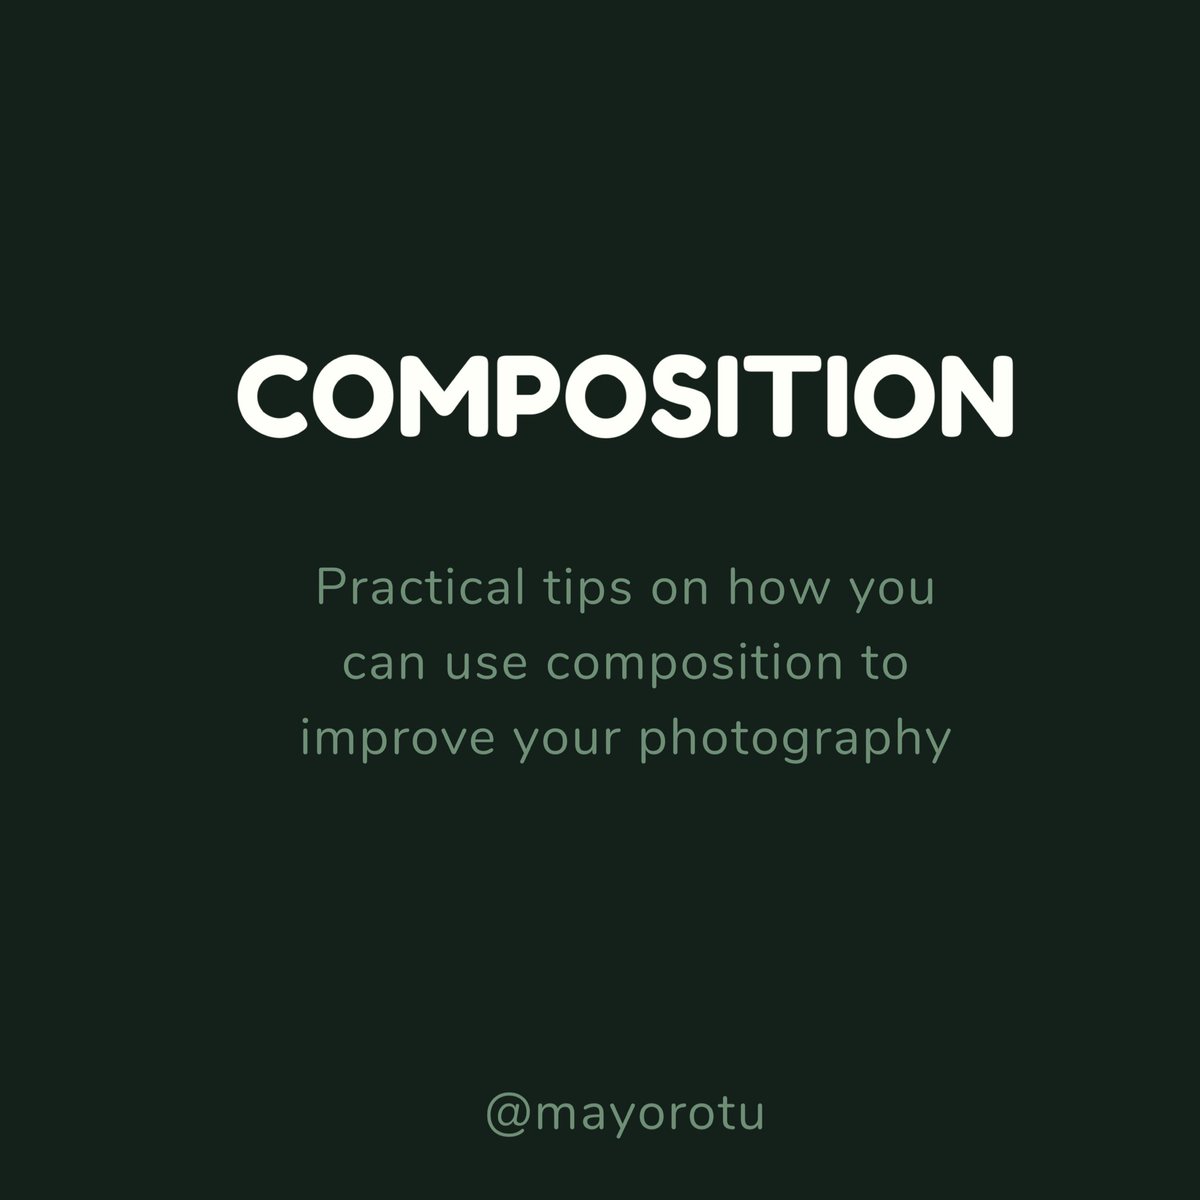 Let’s talk about composition.I hope the tips in this thread will help you take better images as a photographer. It’s a Thread